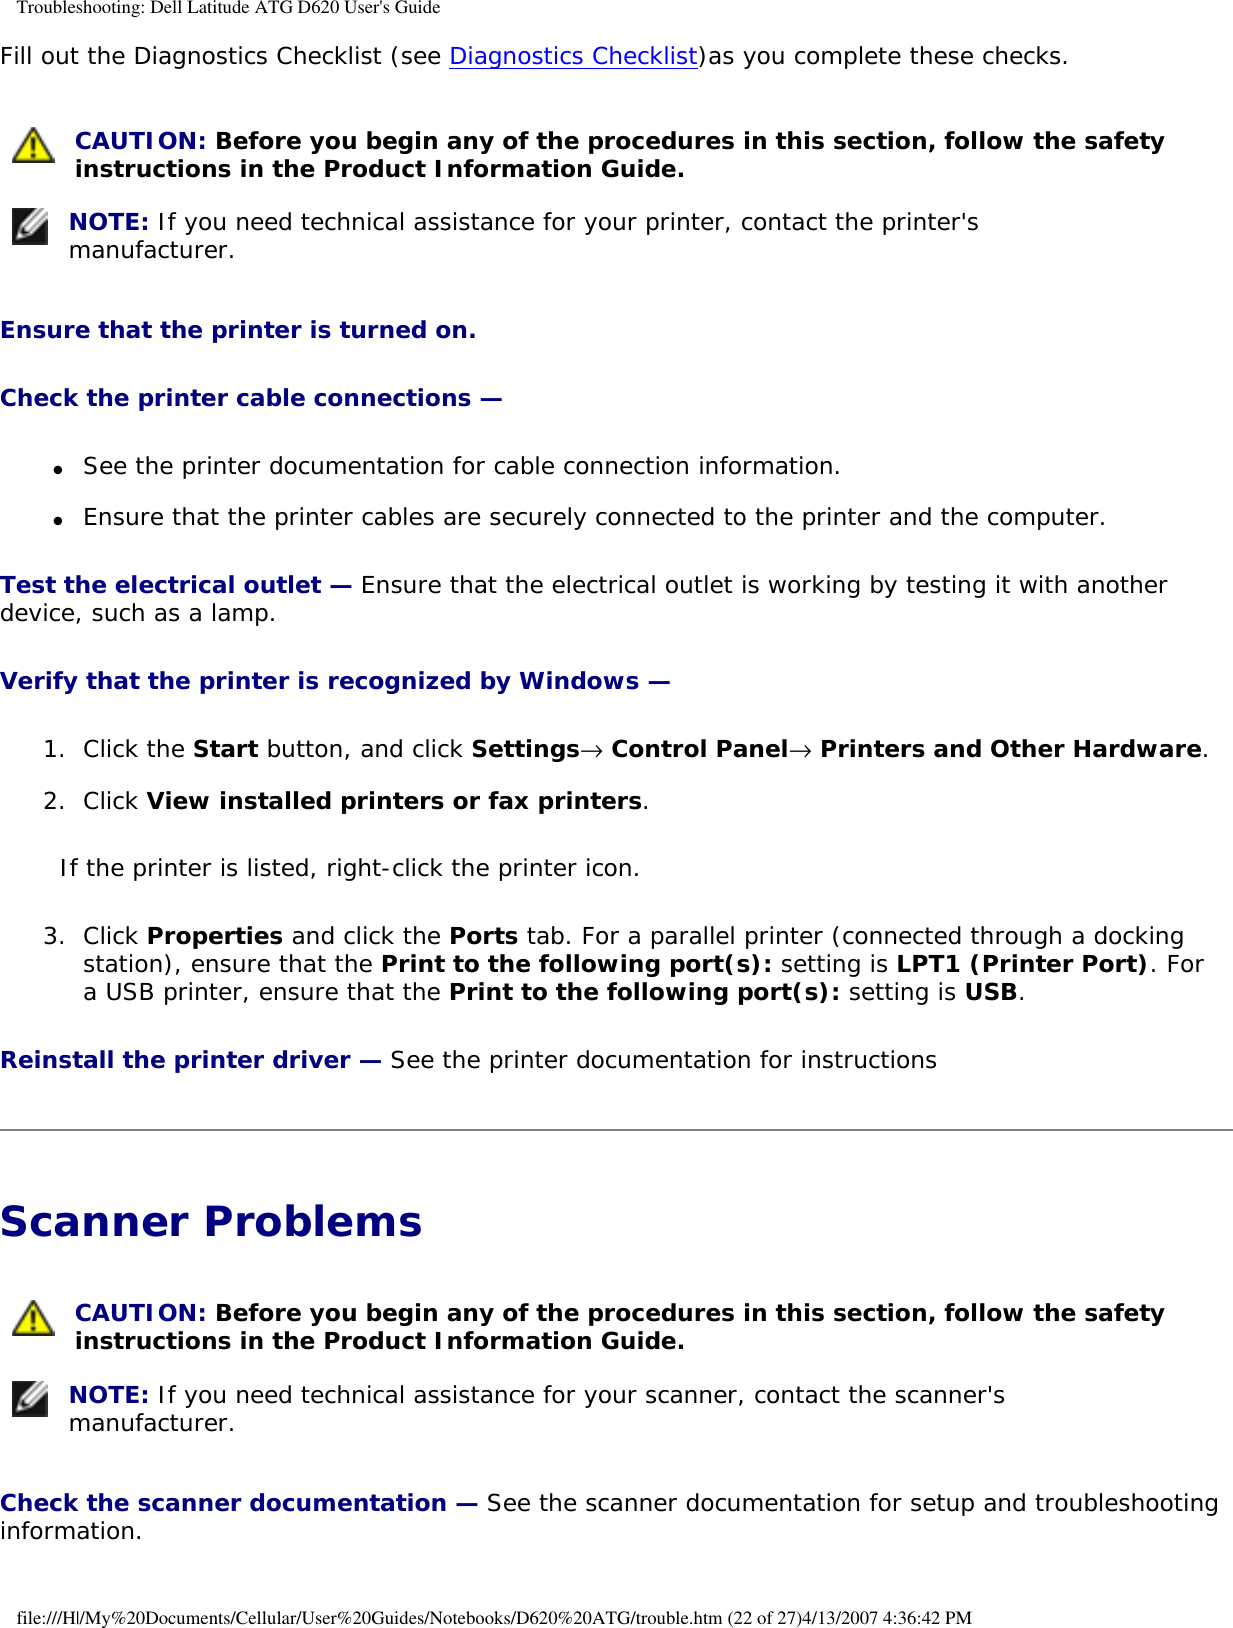 Troubleshooting: Dell Latitude ATG D620 User&apos;s GuideFill out the Diagnostics Checklist (see Diagnostics Checklist)as you complete these checks. CAUTION: Before you begin any of the procedures in this section, follow the safety instructions in the Product Information Guide.  NOTE: If you need technical assistance for your printer, contact the printer&apos;s manufacturer. Ensure that the printer is turned on. Check the printer cable connections — ●     See the printer documentation for cable connection information.  ●     Ensure that the printer cables are securely connected to the printer and the computer.  Test the electrical outlet — Ensure that the electrical outlet is working by testing it with another device, such as a lamp.Verify that the printer is recognized by Windows — 1.  Click the Start button, and click Settings→ Control Panel→ Printers and Other Hardware.   2.  Click View installed printers or fax printers.   If the printer is listed, right-click the printer icon.3.  Click Properties and click the Ports tab. For a parallel printer (connected through a docking station), ensure that the Print to the following port(s): setting is LPT1 (Printer Port). For a USB printer, ensure that the Print to the following port(s): setting is USB.   Reinstall the printer driver — See the printer documentation for instructionsScanner Problems  CAUTION: Before you begin any of the procedures in this section, follow the safety instructions in the Product Information Guide.  NOTE: If you need technical assistance for your scanner, contact the scanner&apos;s manufacturer. Check the scanner documentation — See the scanner documentation for setup and troubleshooting information.file:///H|/My%20Documents/Cellular/User%20Guides/Notebooks/D620%20ATG/trouble.htm (22 of 27)4/13/2007 4:36:42 PM